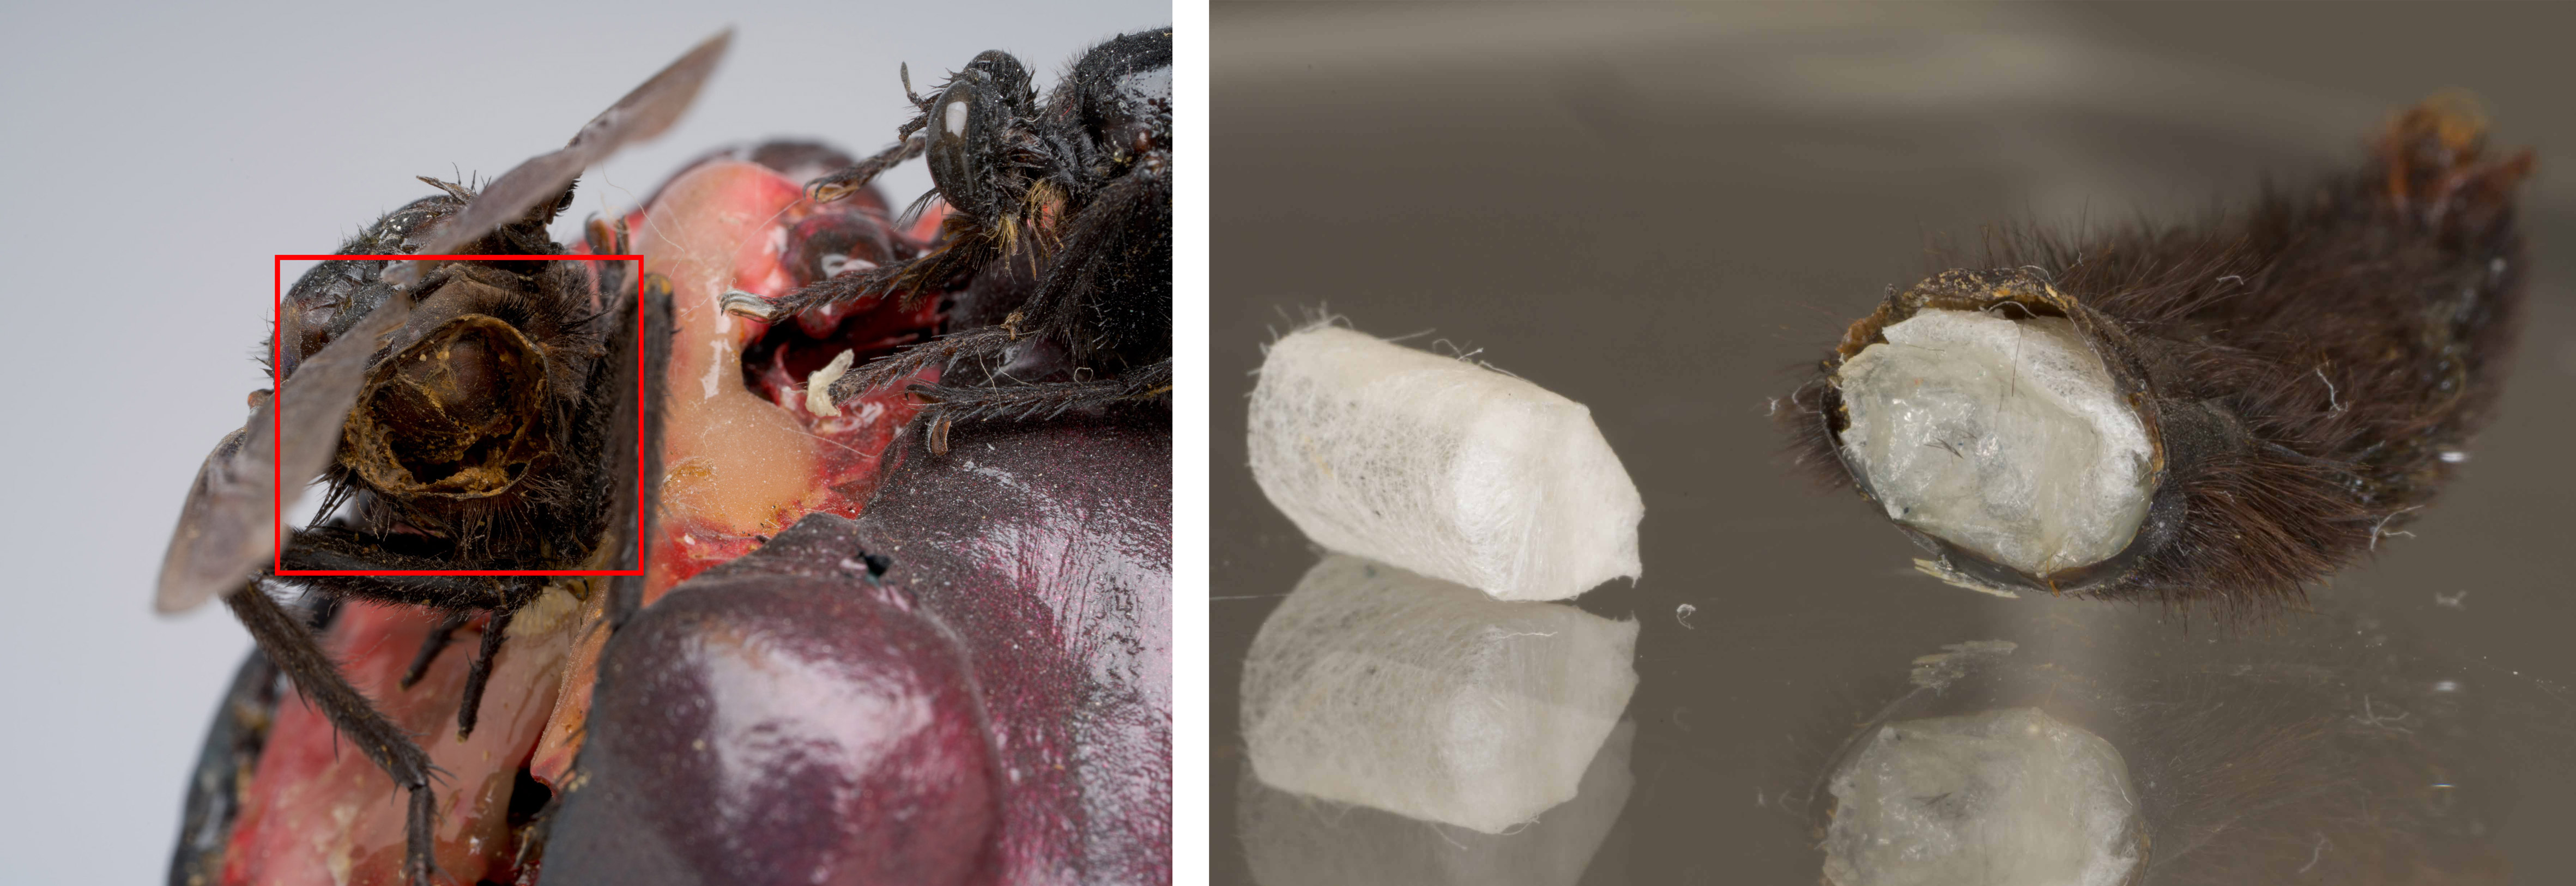 Left: Before treatment. Right: Japanese tissue tubes. Paul Thek, Untitled (Meat Piece with Flies) (details), 1965, Los Angeles County Museum of Art, The Judith Rothschild Foundation, photo © Museum Associates/LACMA Conservation, by Yosi Pozeilov